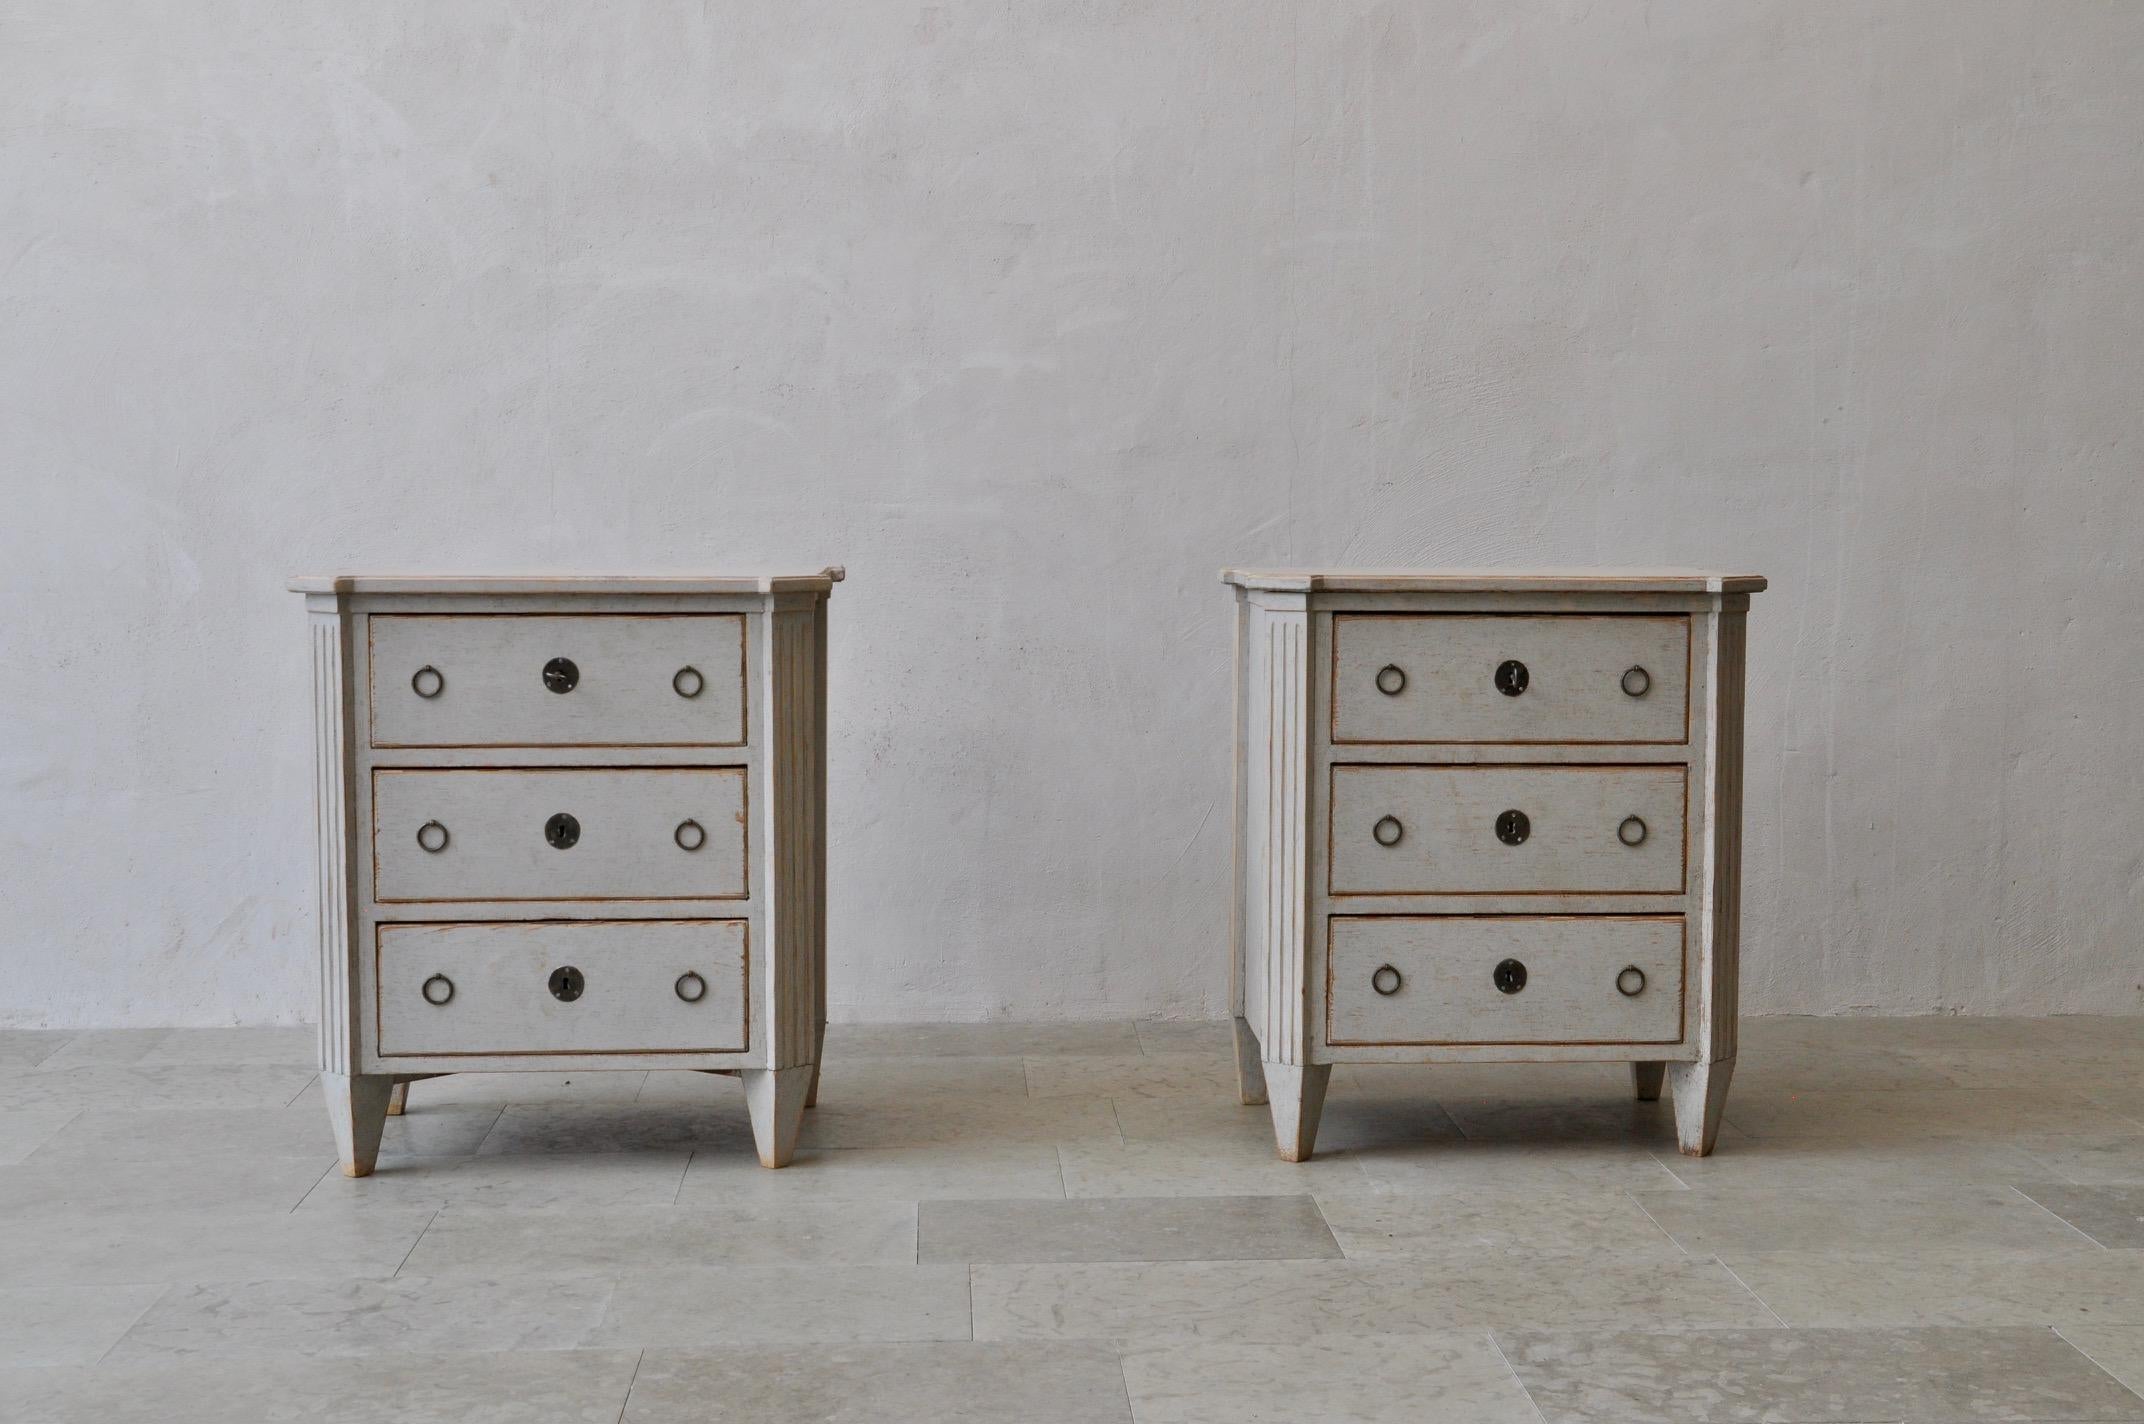 A beautiful pair of Swedish bedside chests in the Gustavian style. Three drawers, brass hardware, canted and fluted corner posts, and tapered legs. Original locks with keys.